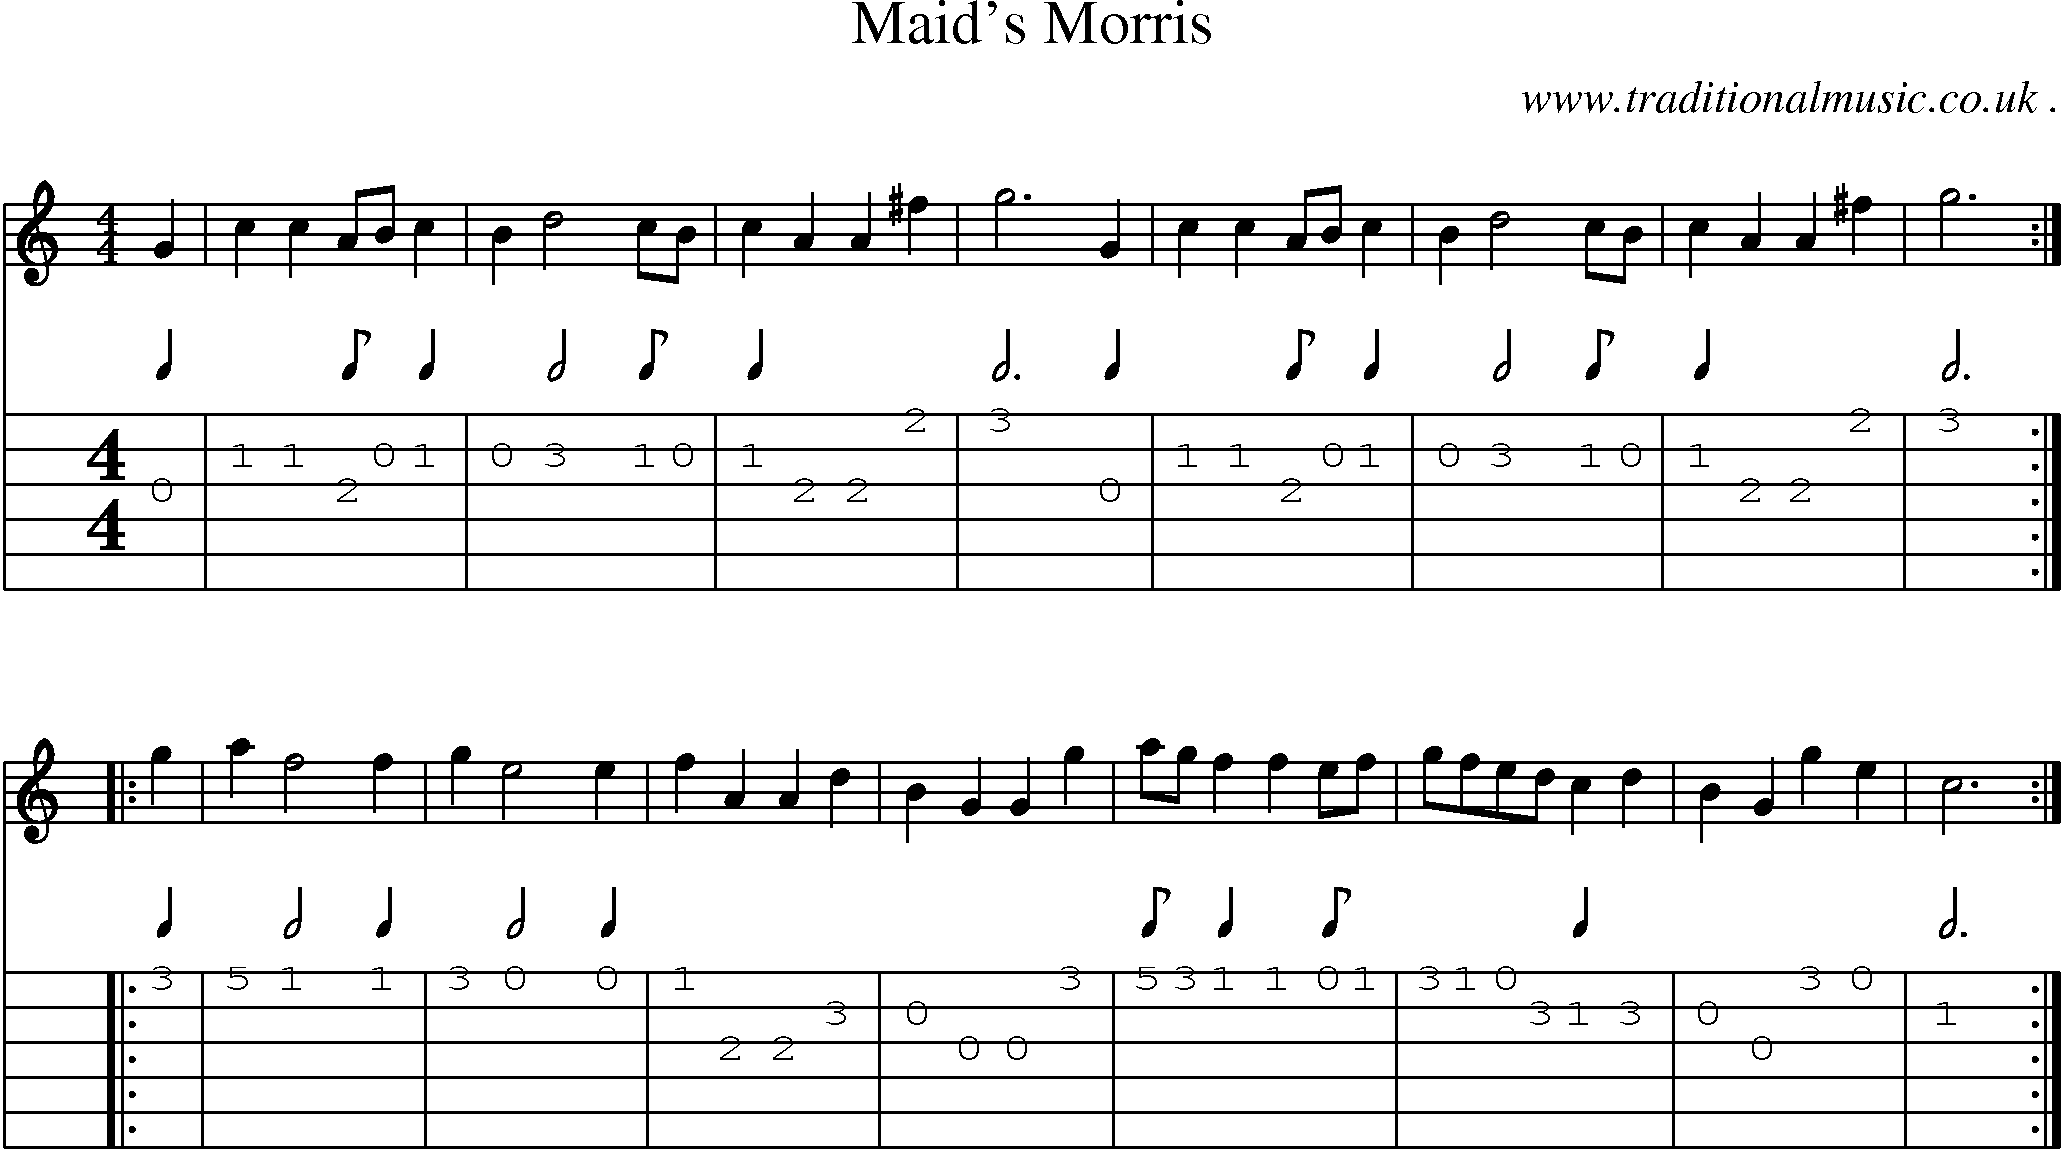 Sheet-Music and Guitar Tabs for Maids Morris